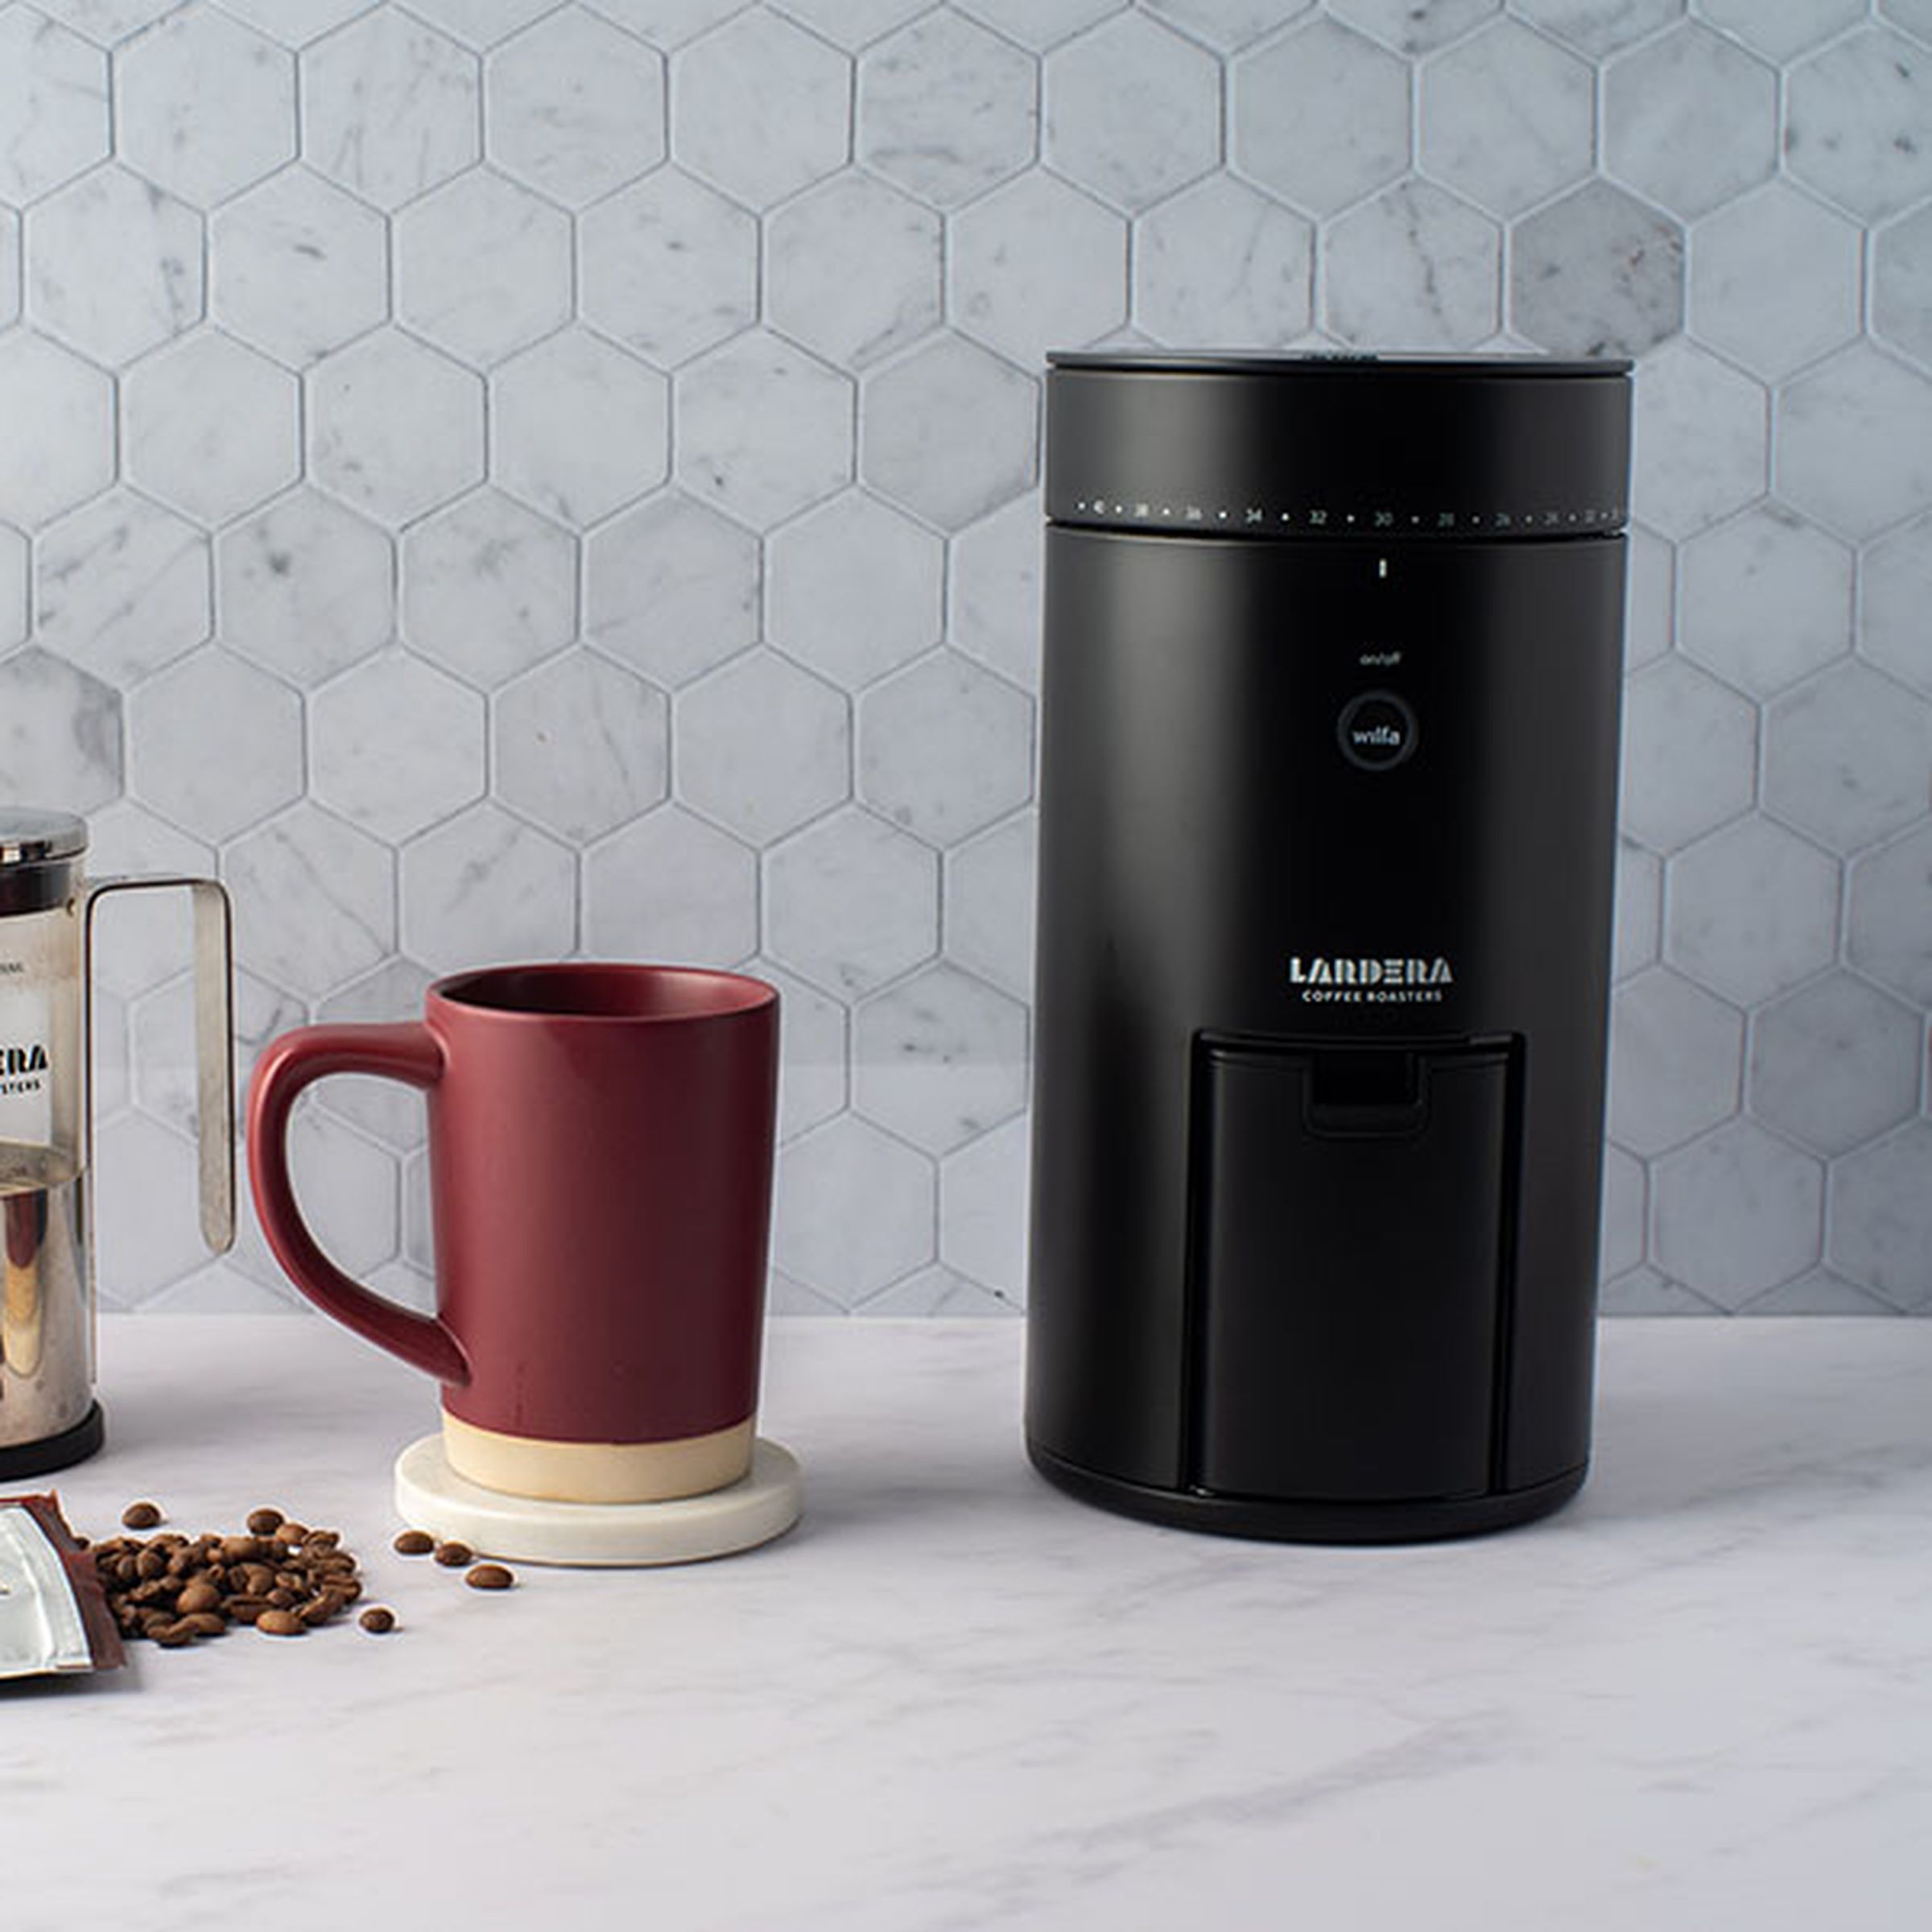 From left to right, a plant, a French press coffee maker, a reddish-brown mug, and a black, conical coffee grinder